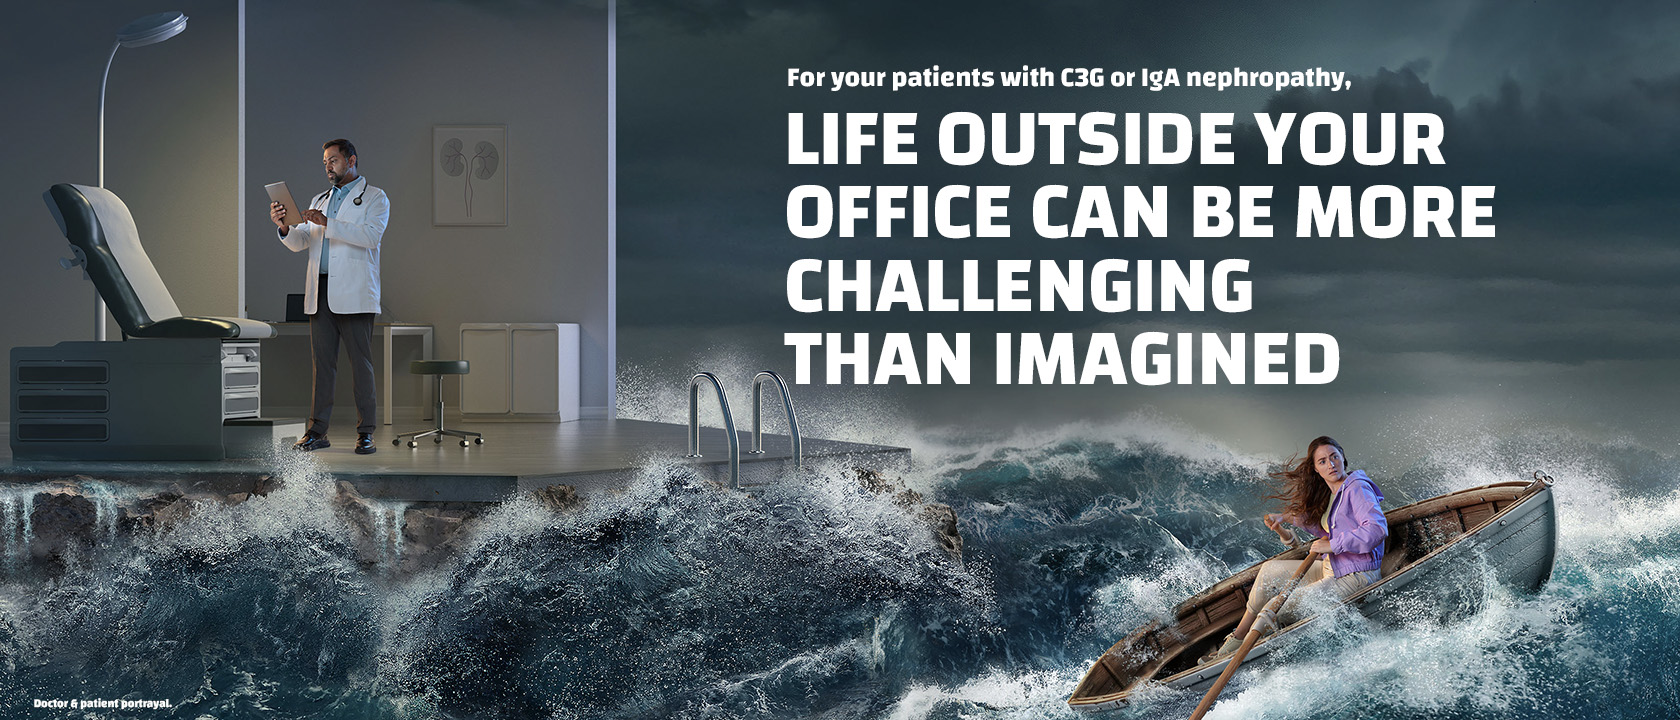 For your C3G and IgA Nephropathy patients life outside your office can be more challenging than imagined.